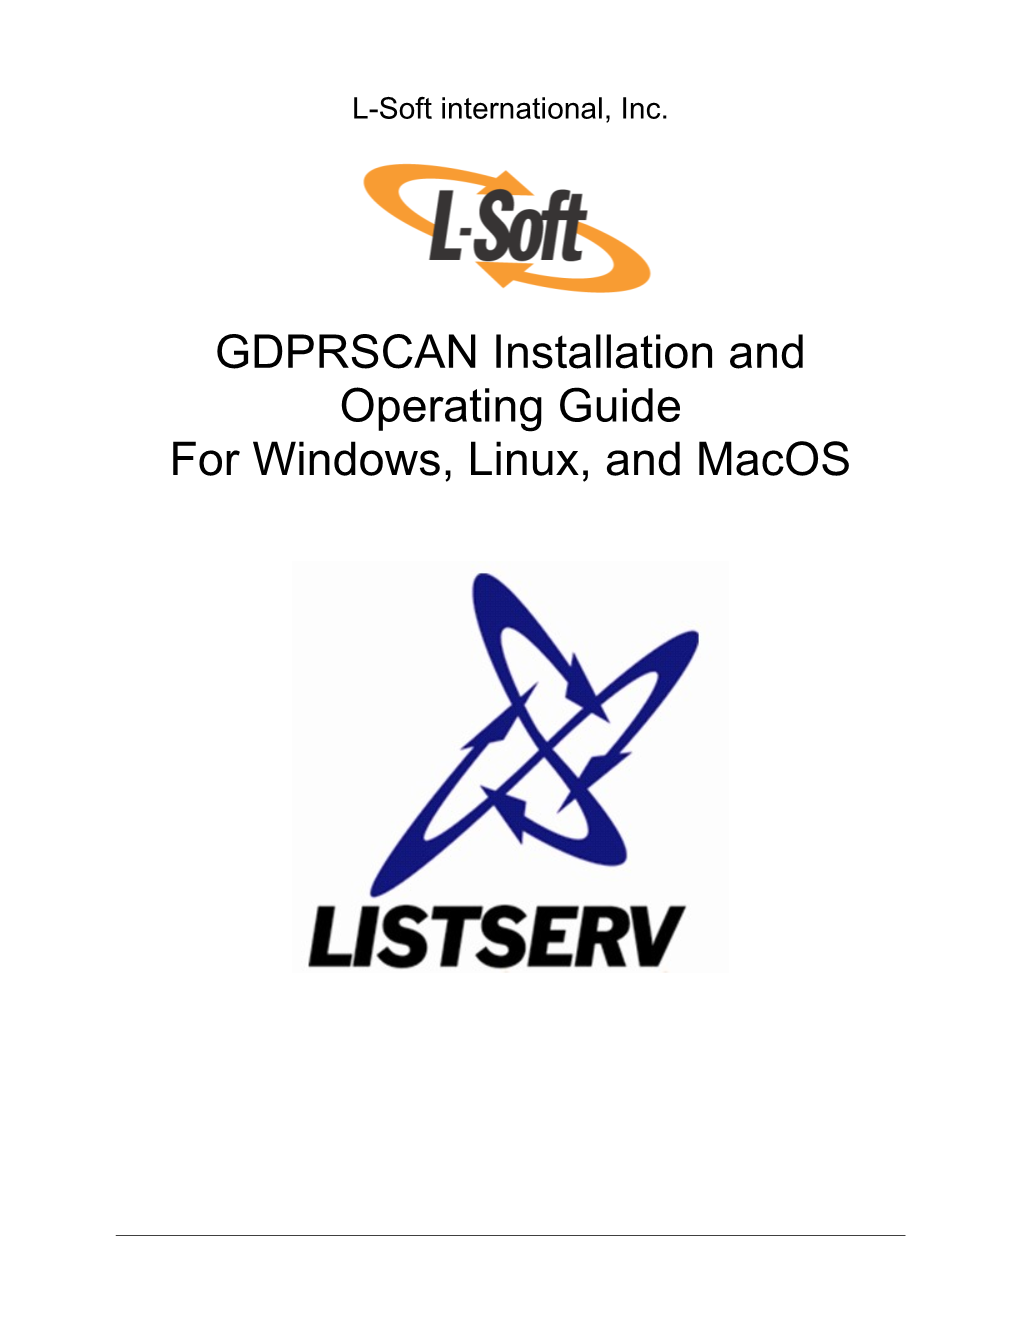 GDPRSCAN Installation and Operating Guide for Windows, Linux, and Macos